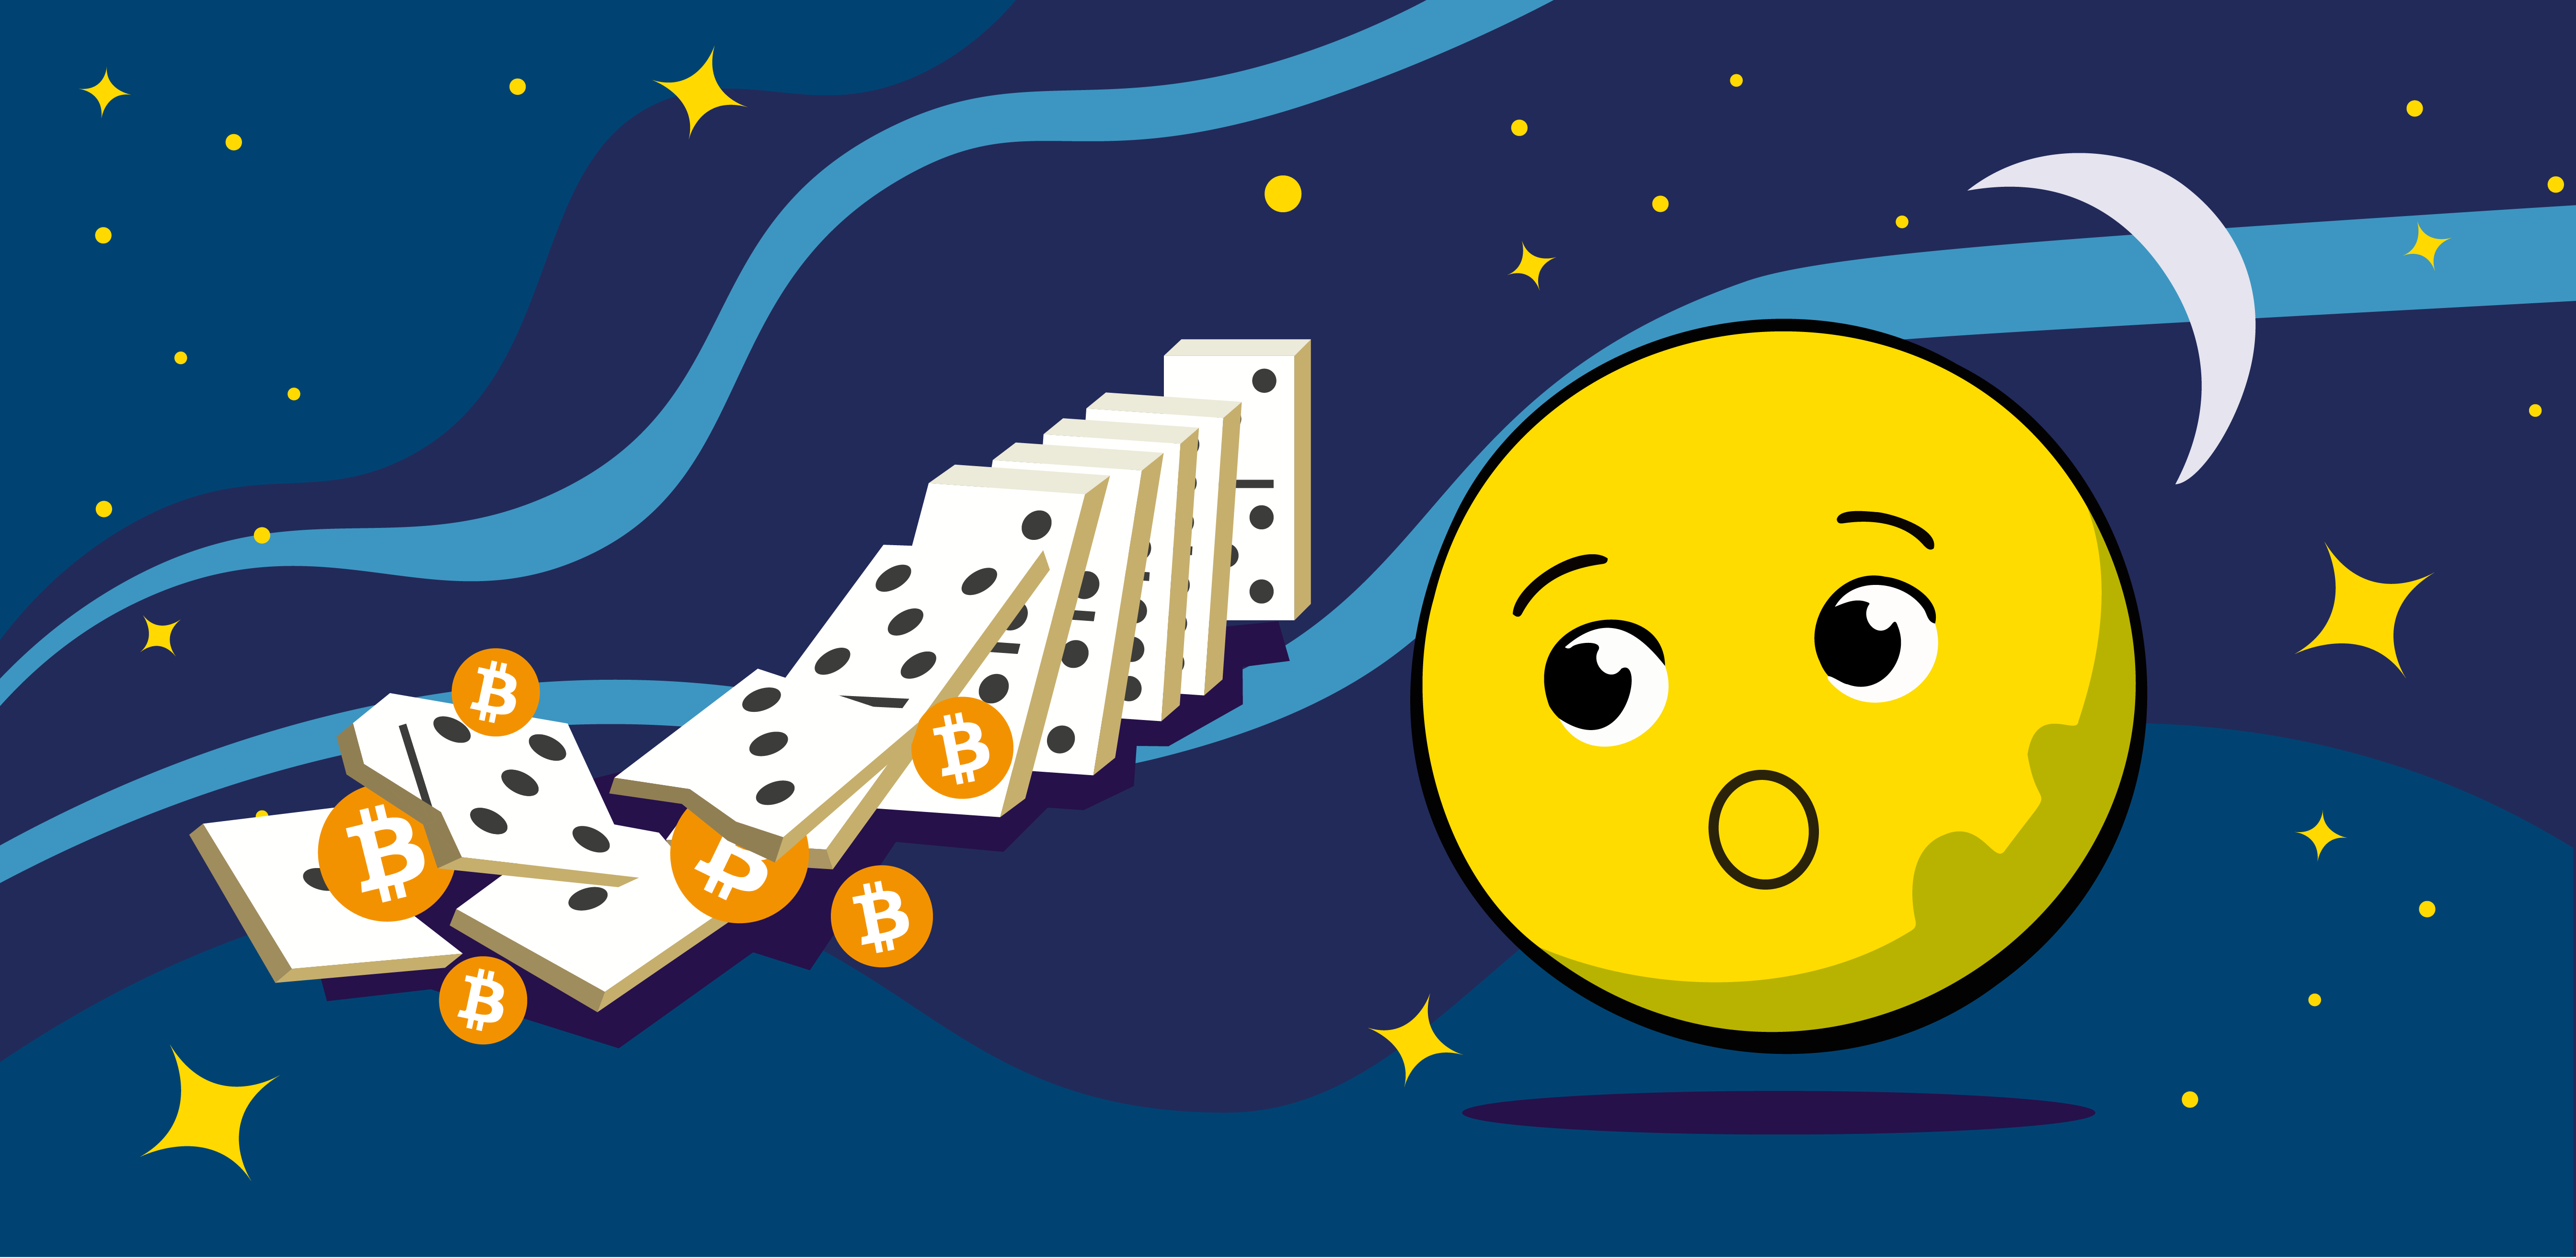 Yet Another Crypto Collapse: When Will the Dominos Stop Falling